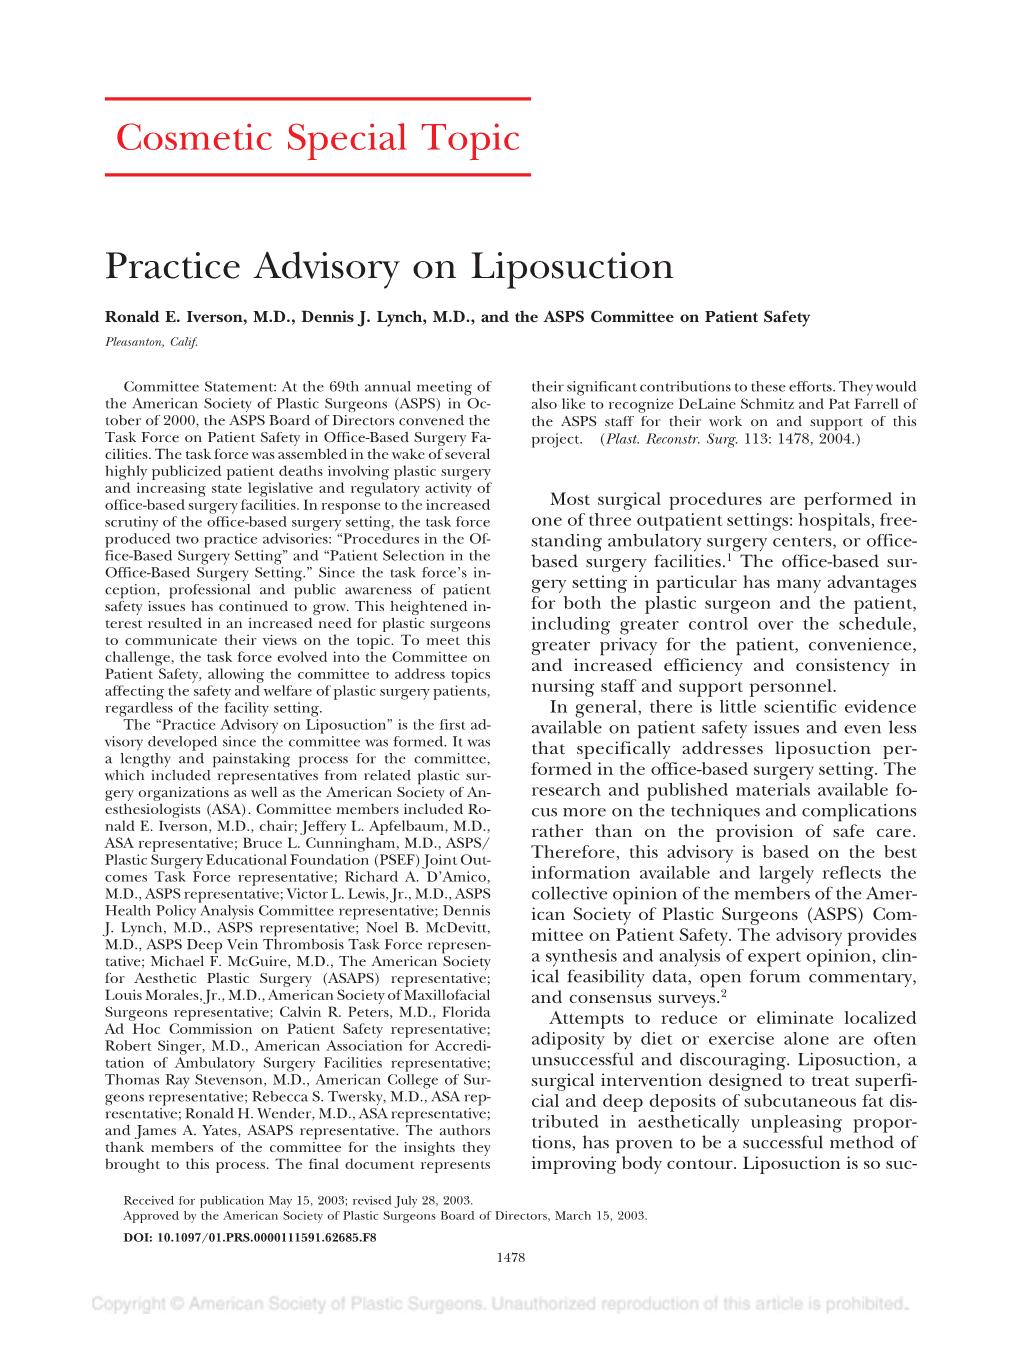 Cosmetic Special Topic Practice Advisory on Liposuction